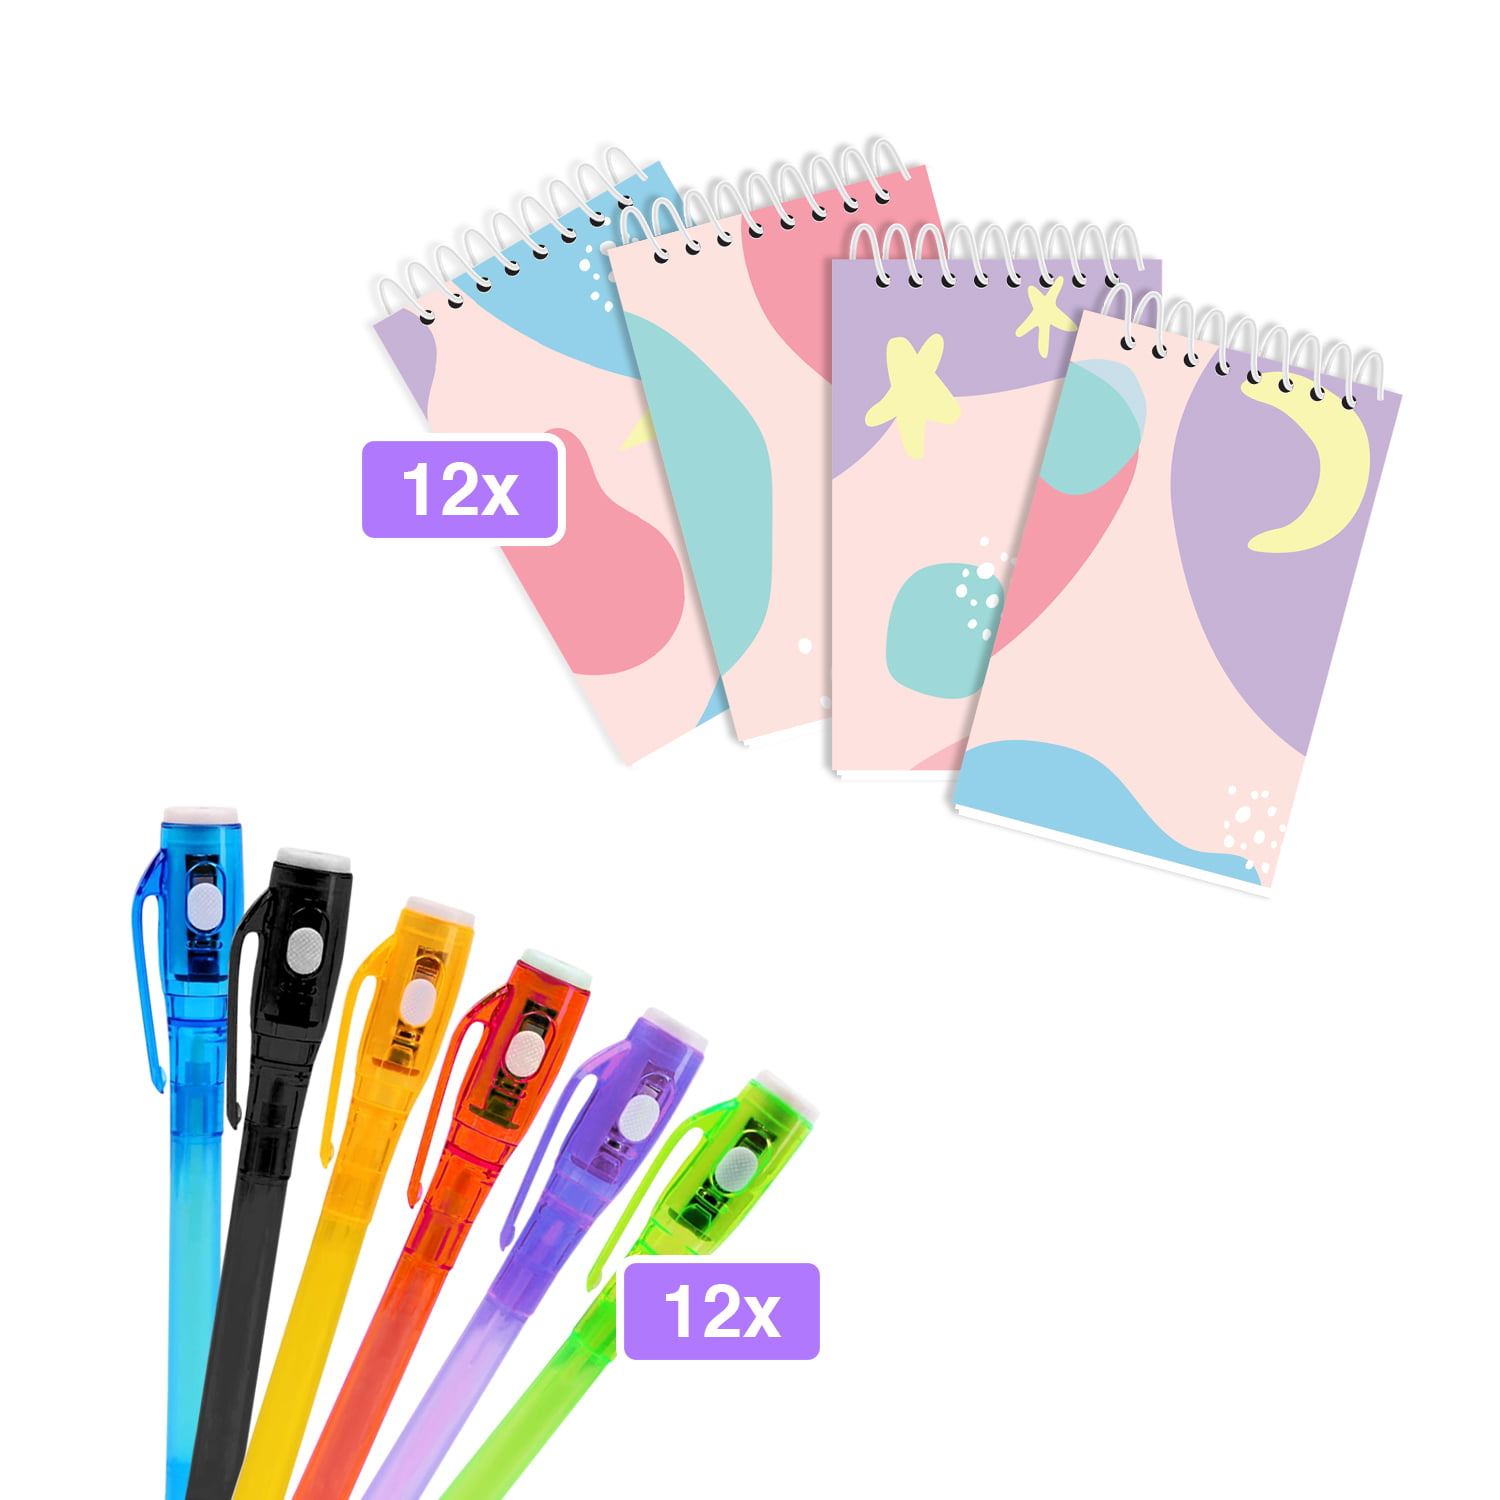  BONNYCO Invisible Ink Pen, Notebook Pack 16 Superhero Party  Favors  Super Hero Party Favors for Kids Goodie Bags Stuffers Pinata  Stuffers Classroom Prizes Return Gifts for Kids Birthday Student Gifts 